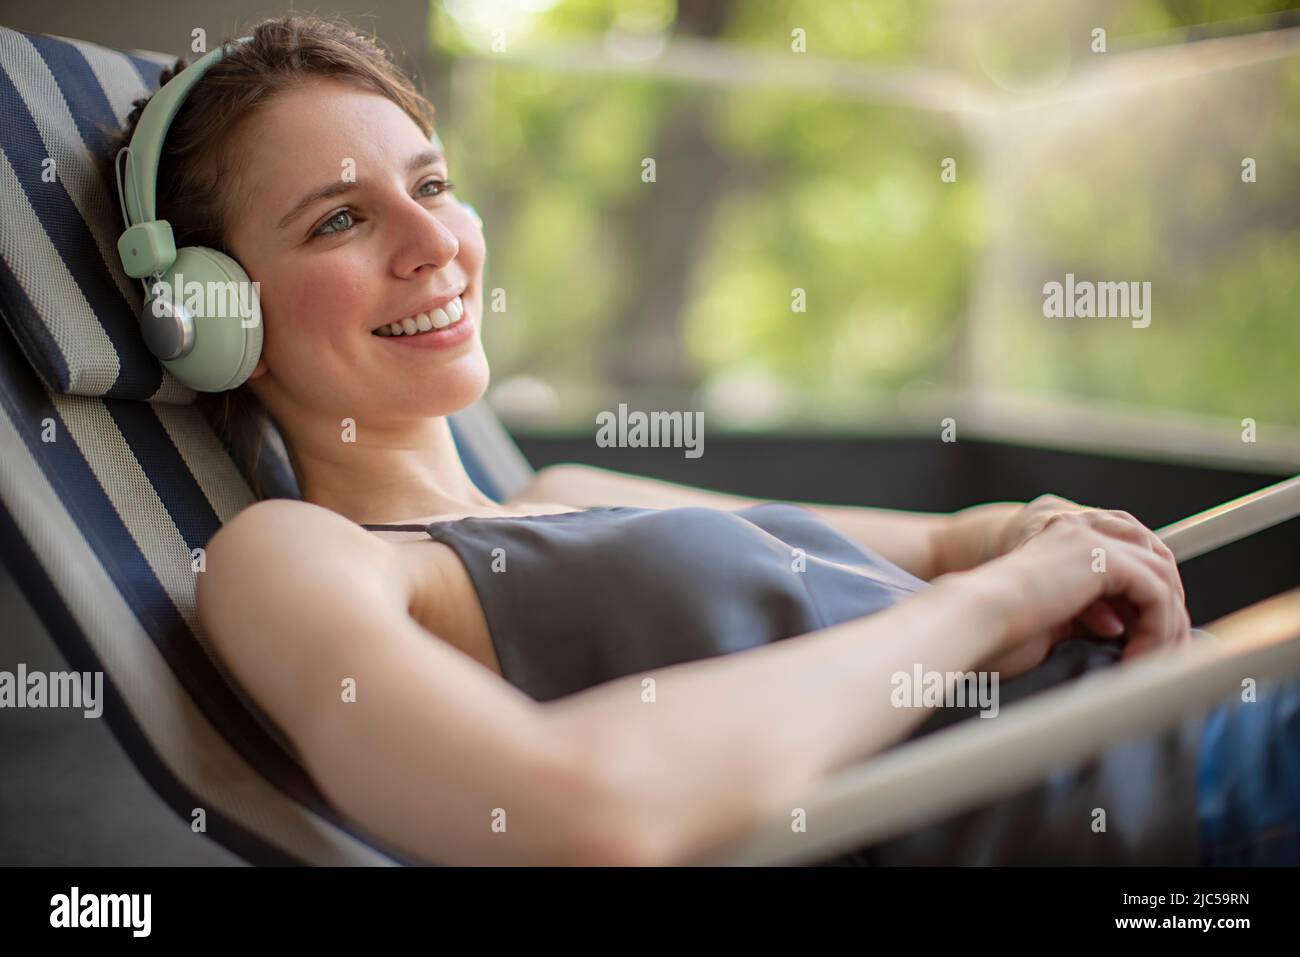 Closeup of a young woman listening to music on headphone Stock Photo